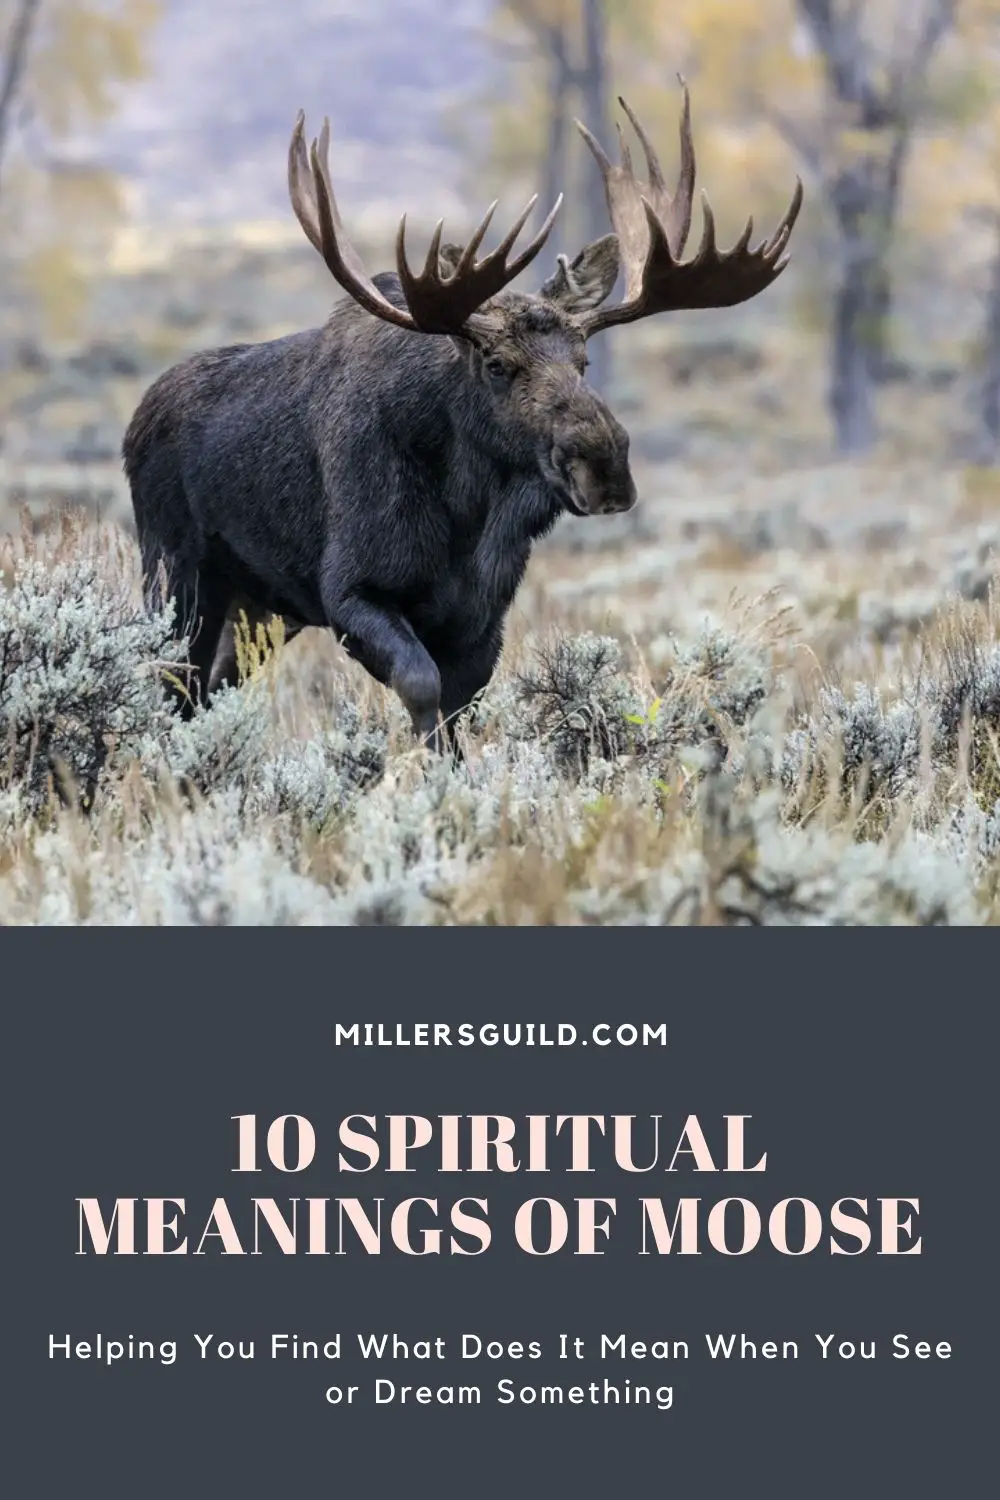 2 Moose As A Sign Of Guidance